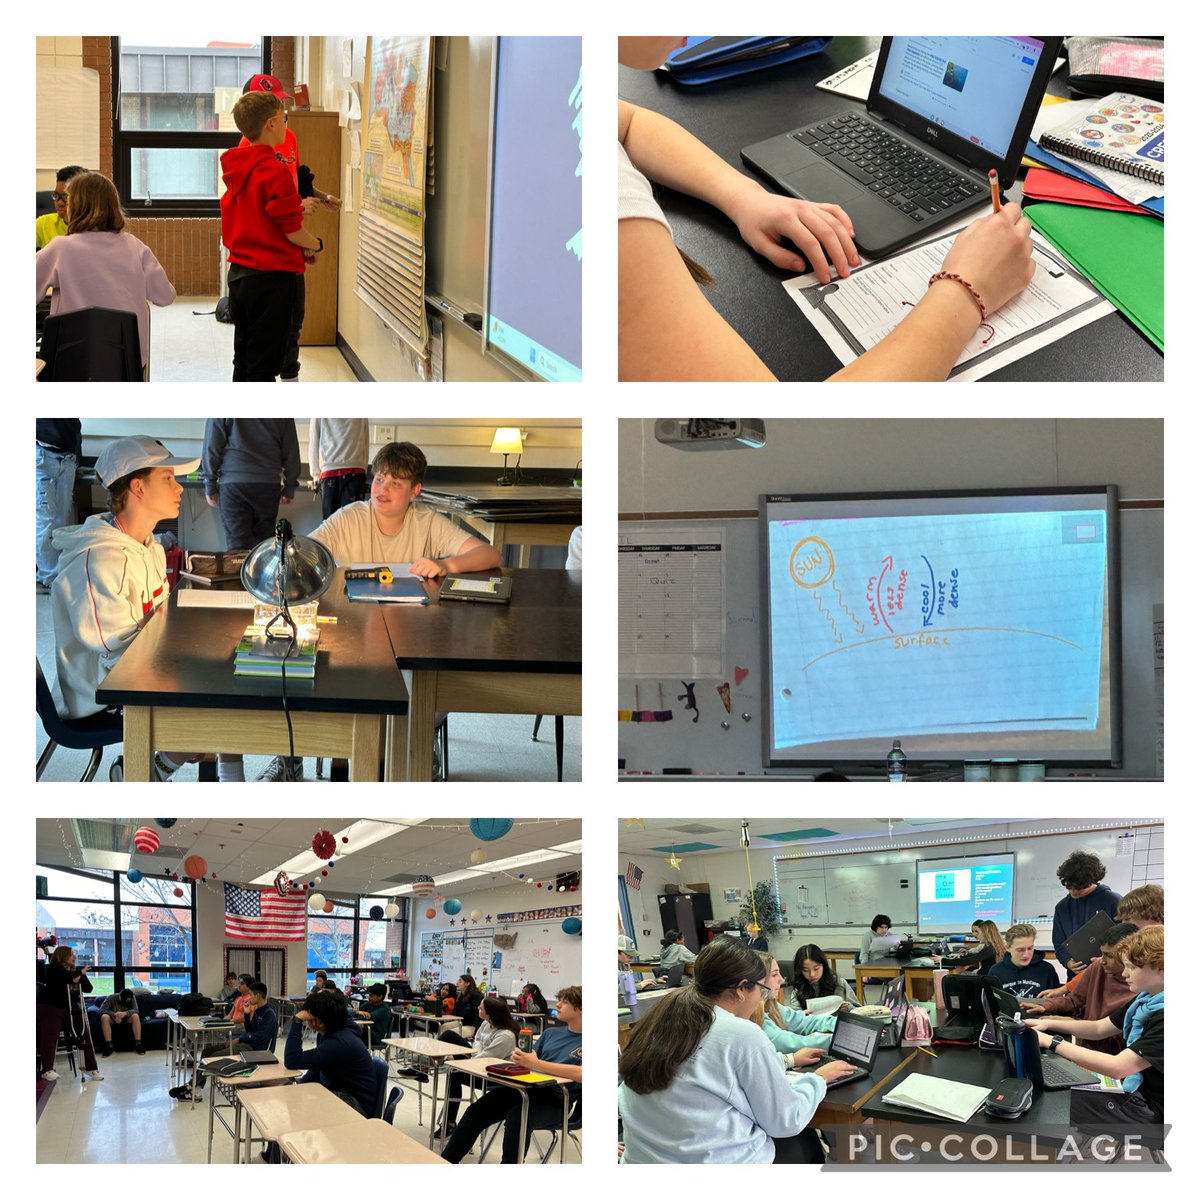 Last week we visited several science and social studies classes at @CrestviewMiddle. Students debated whether Andrew Jackson should remain on the $20 bill, solved real world problems with plants, and conducted a lab on hearing the earth’s surface and more! #FocusinLearning